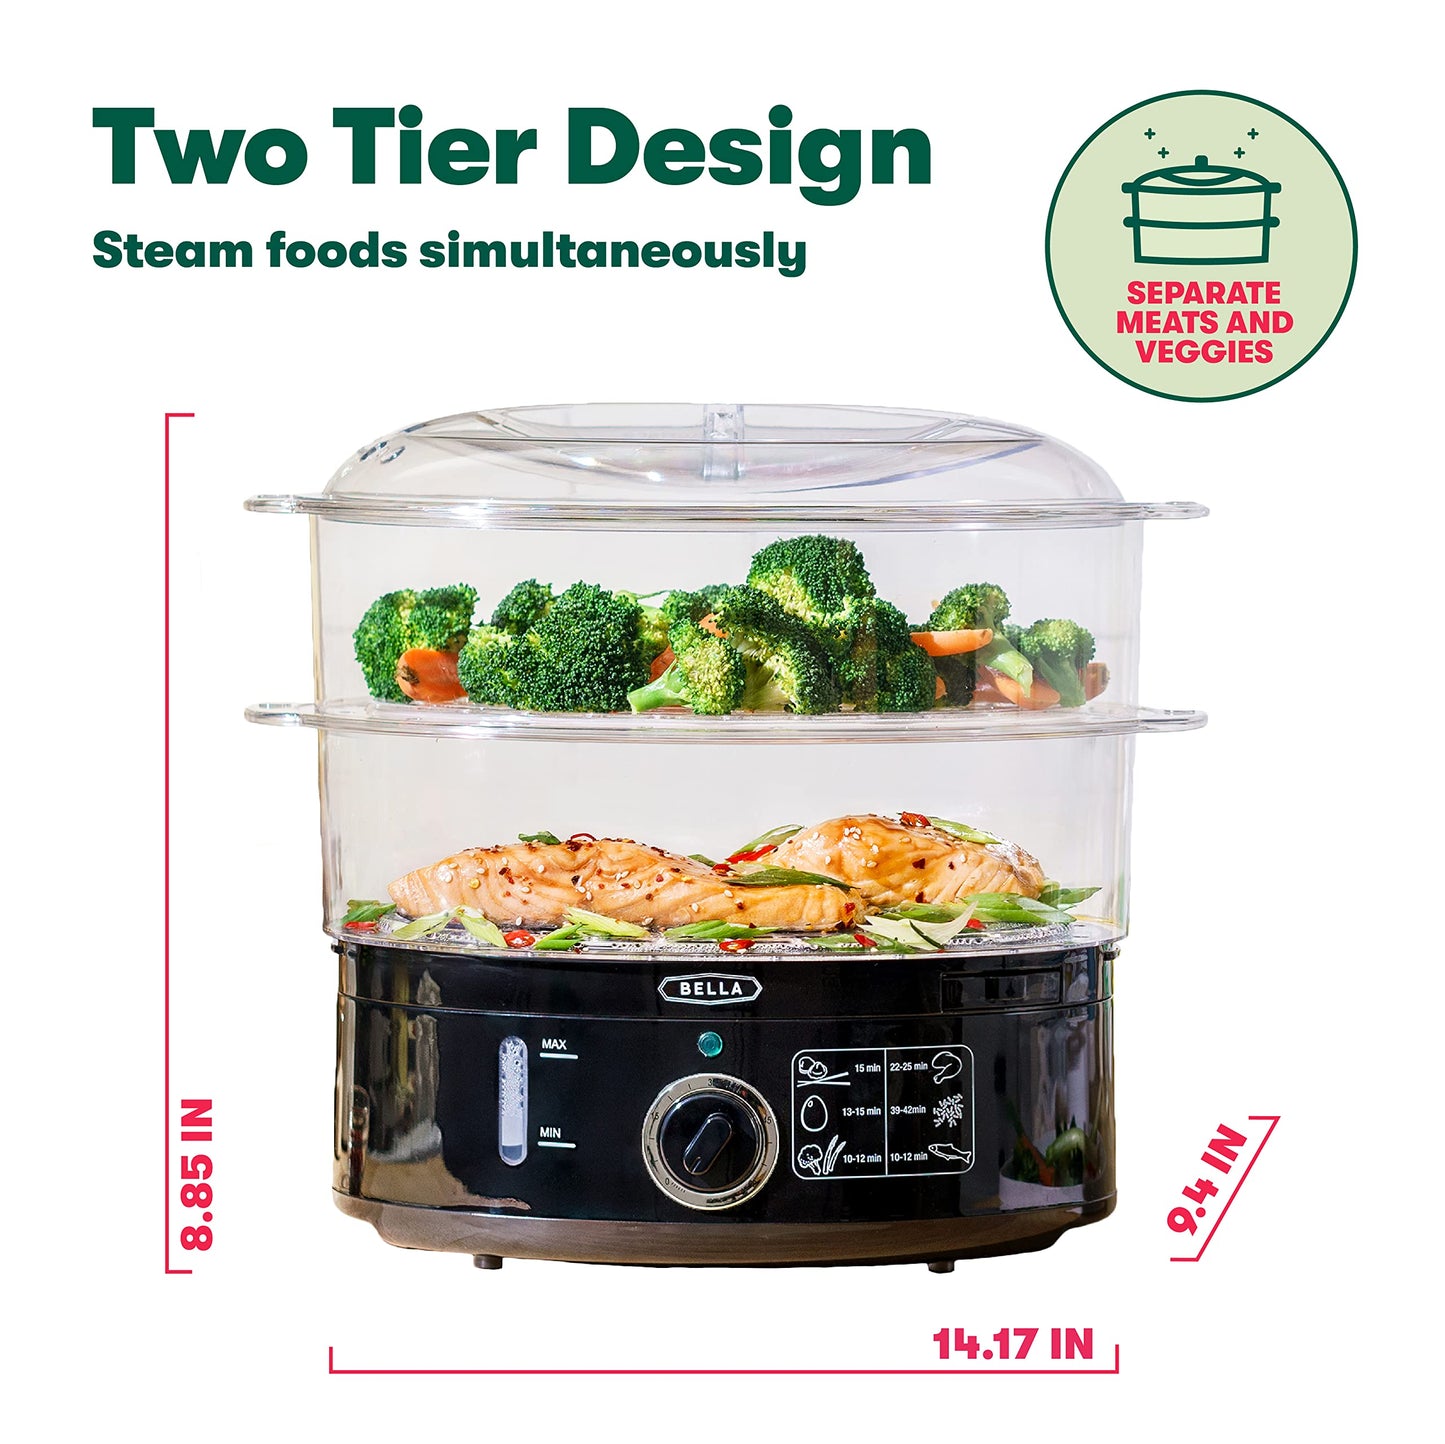 BELLA Two Tier Food Steamer with Dishwasher Safe Lids and Stackable Baskets & Removable Base for Fast Simultaneous Cooking - Auto Shutoff & Boil Dry Protection, Stainless Steel, 7.4 QT, Black